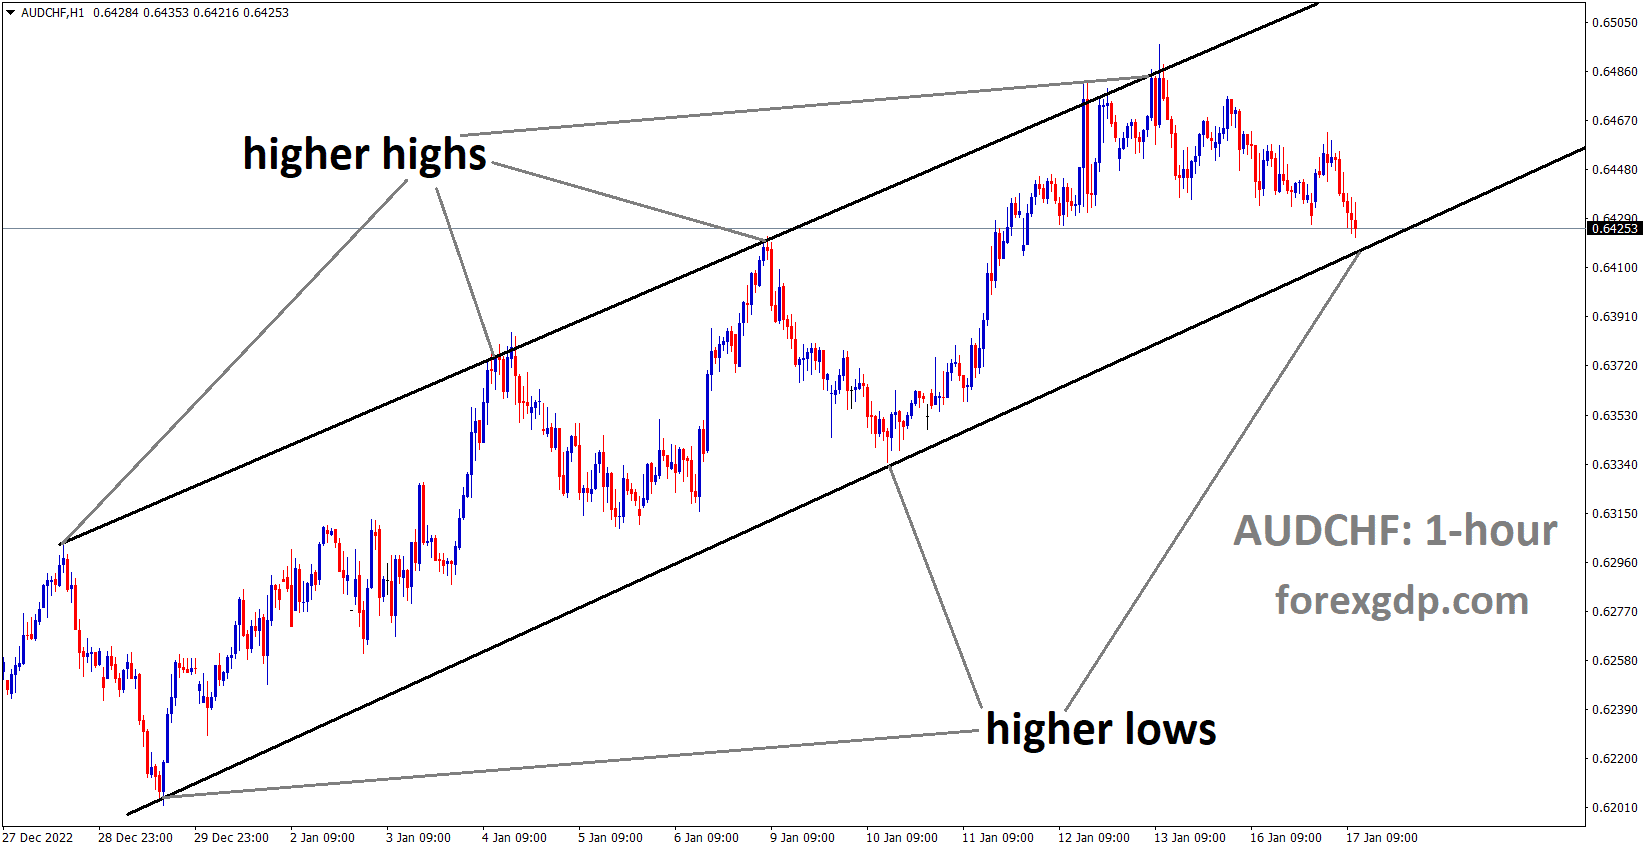 AUDCHF is moving in an Ascending channel and the market has reached the higher low area of the channel 2